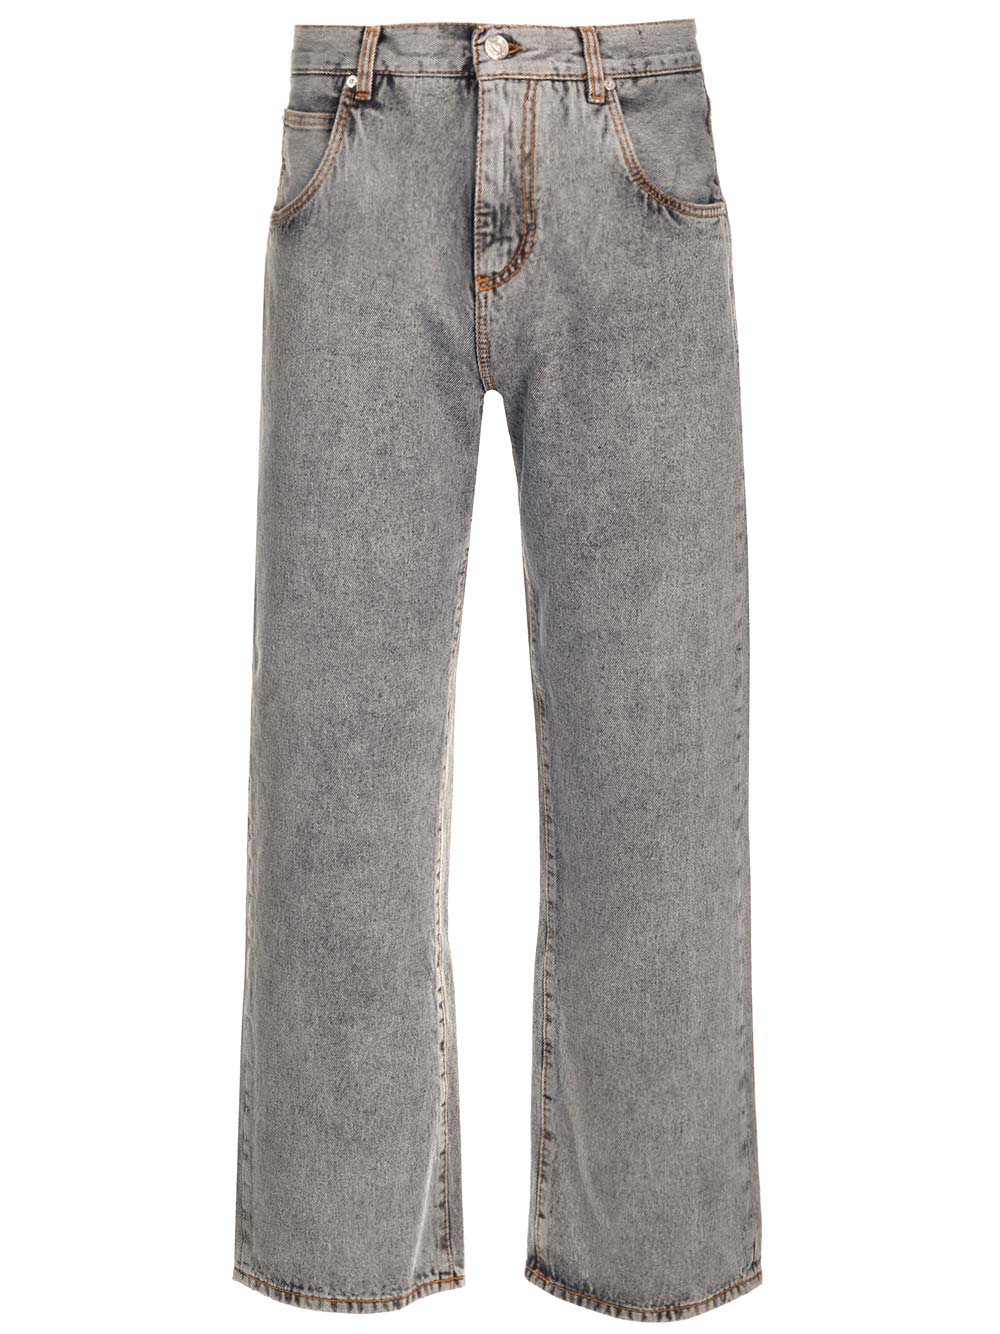 Easy Fit Gray Jeans